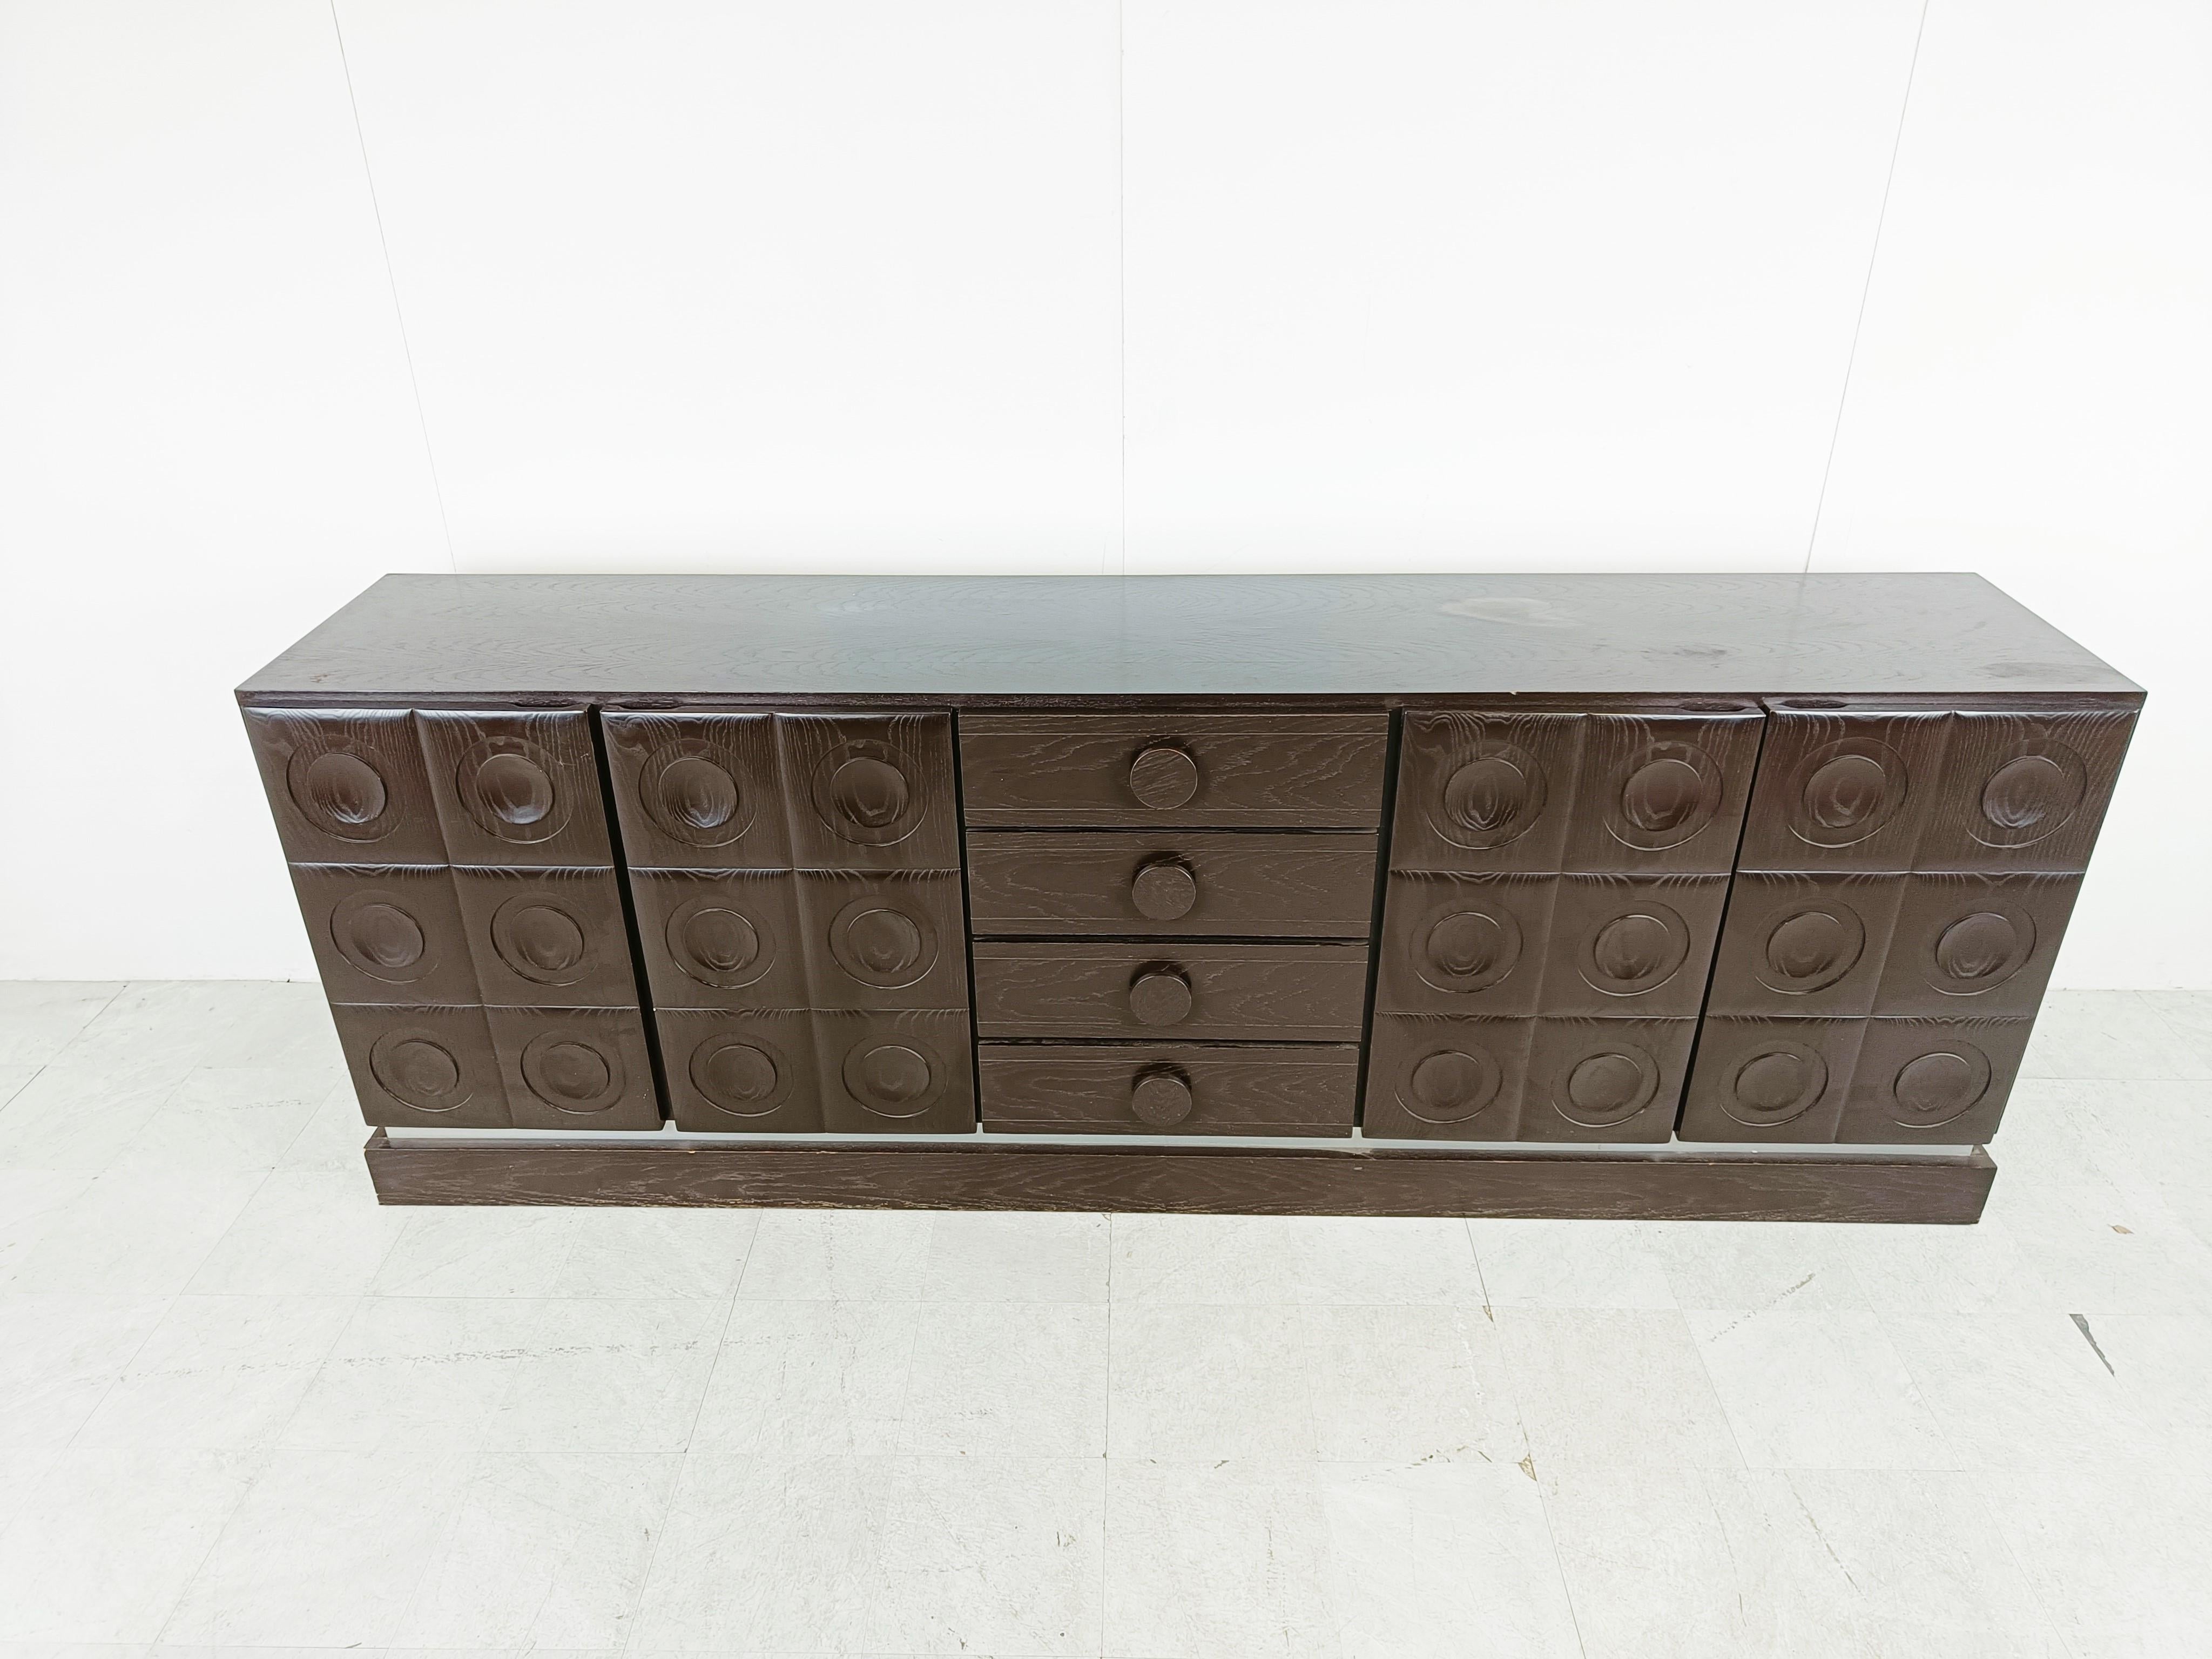 Brown brutalist credenza with 4 graphical doors and 4 central drawers.

Beautiful timeless design and a real eye catcher for your living room.

Good condition.

1970s - Belgium

Dimensions:

Lenght: 275cm/108.26